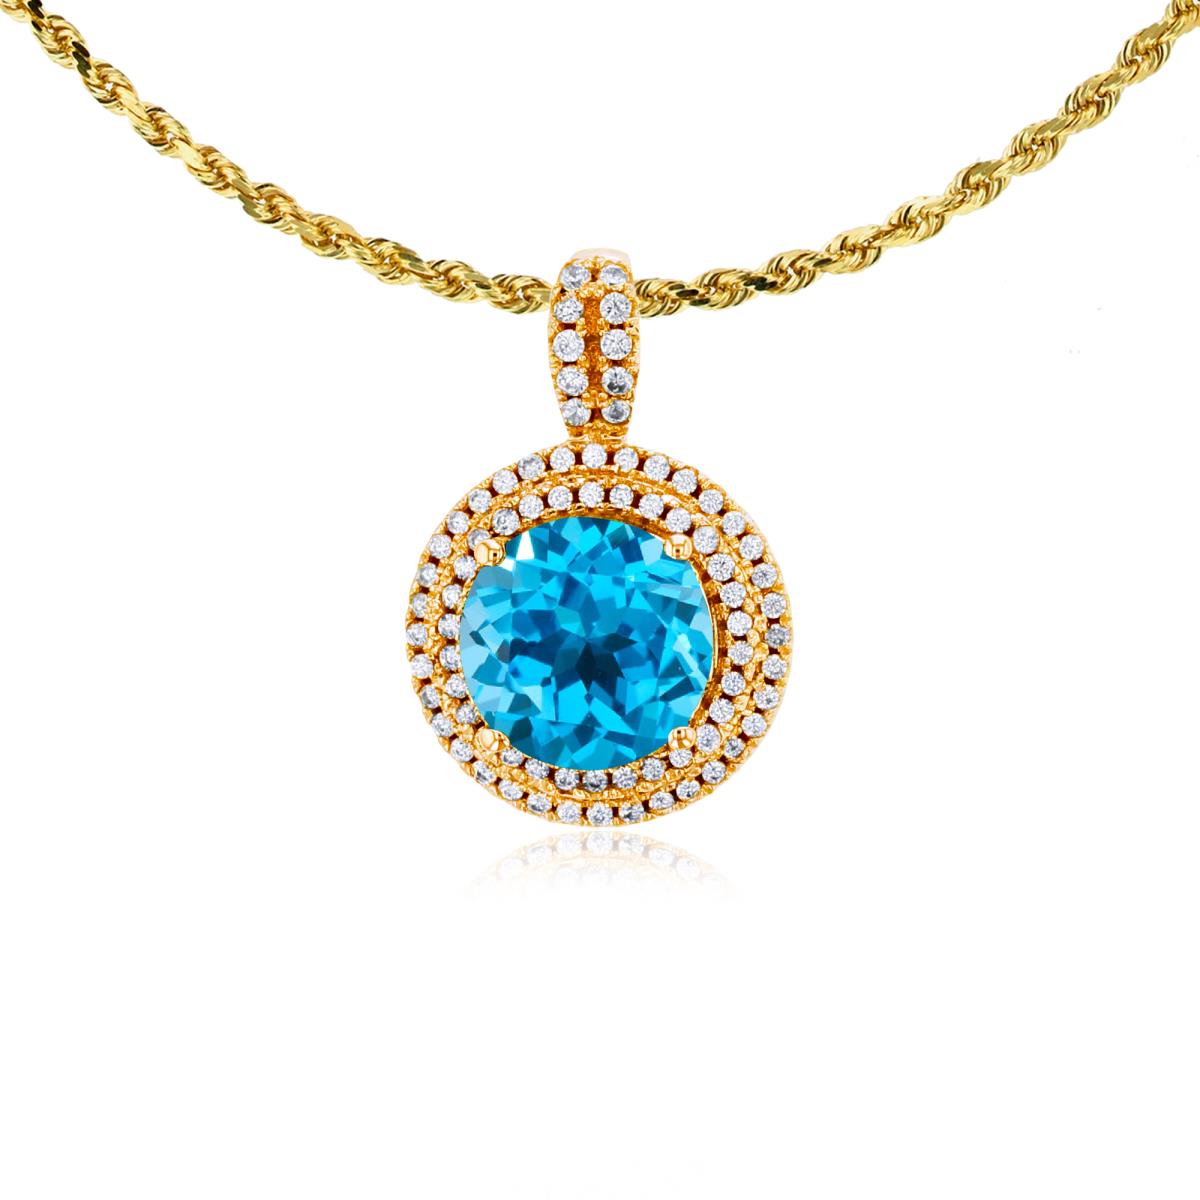 10K Yellow Gold 7mm Round Swiss Blue Topaz & 0.25 CTTW Diamonds Double Halo 18" Rope Chain Necklace